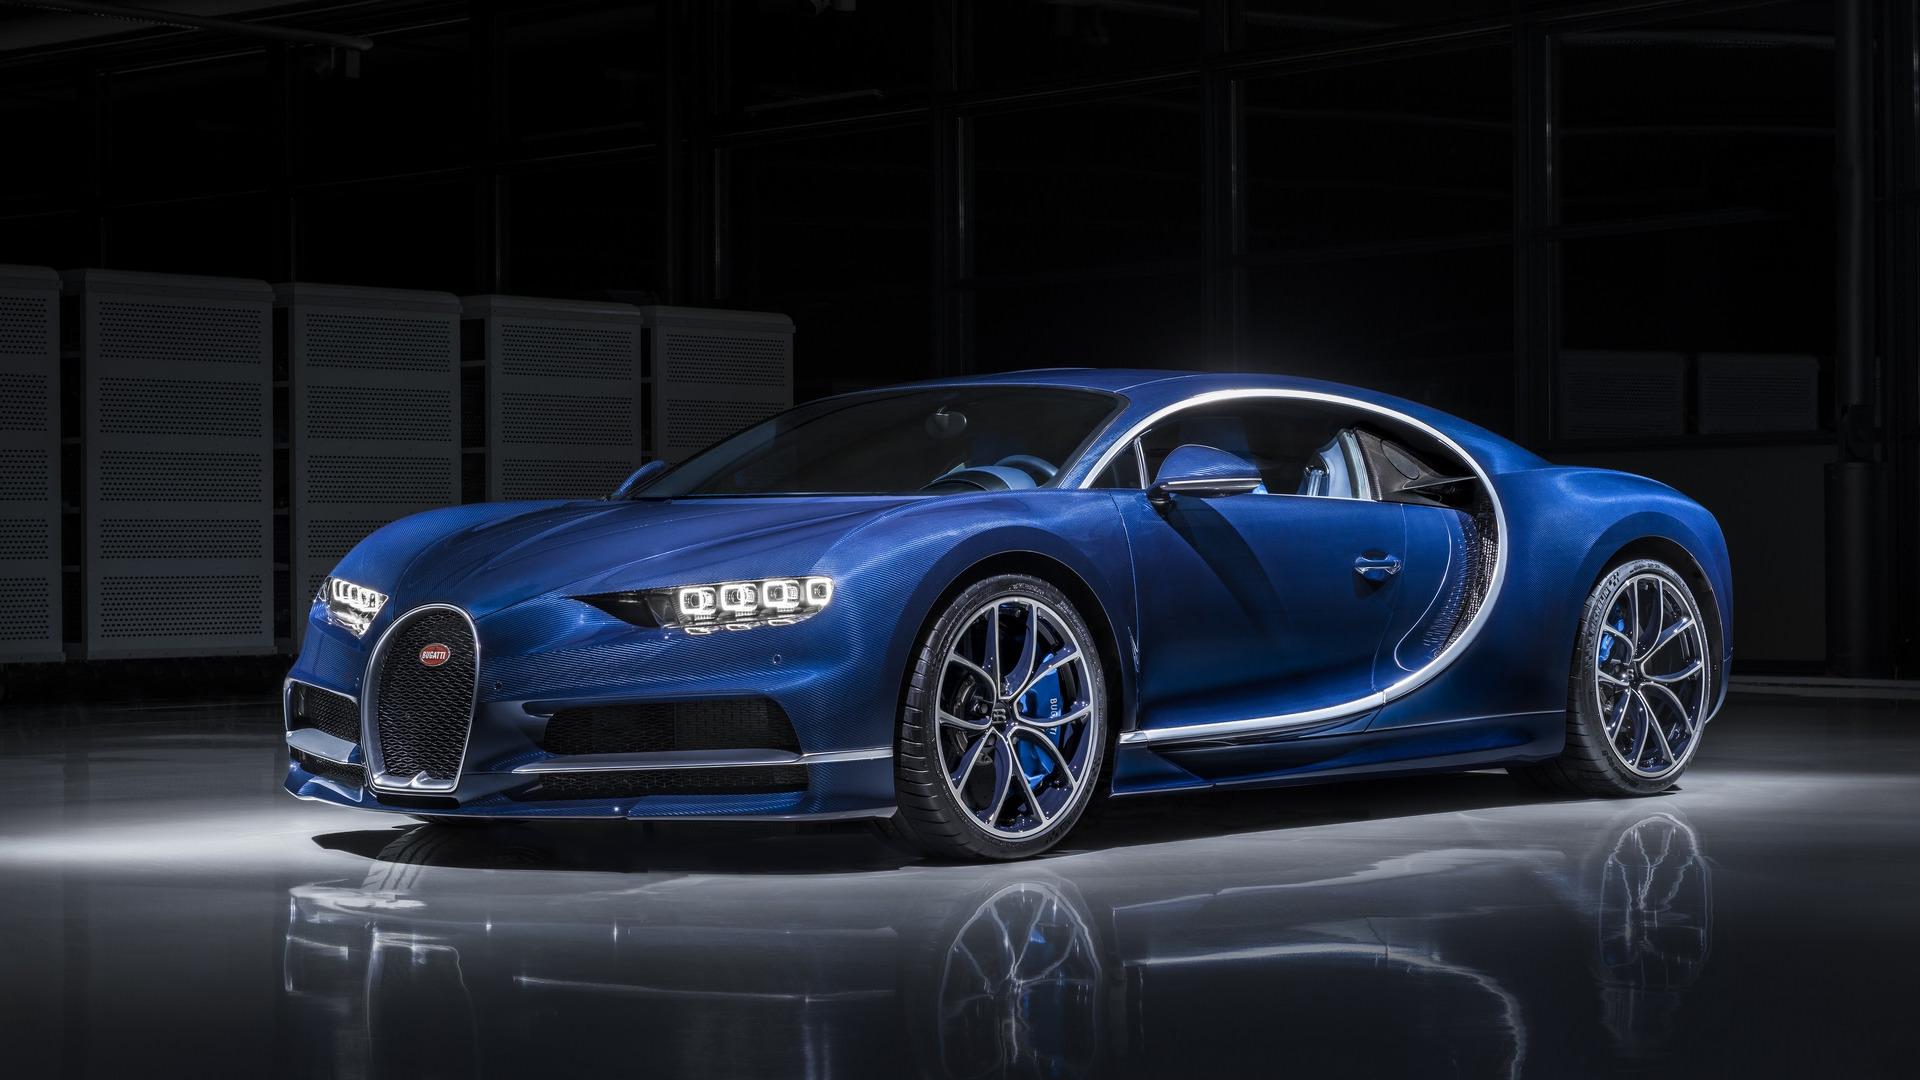 Bugatti Chiron in ‘Bleu Royal’ exposed carbon fibre will be at